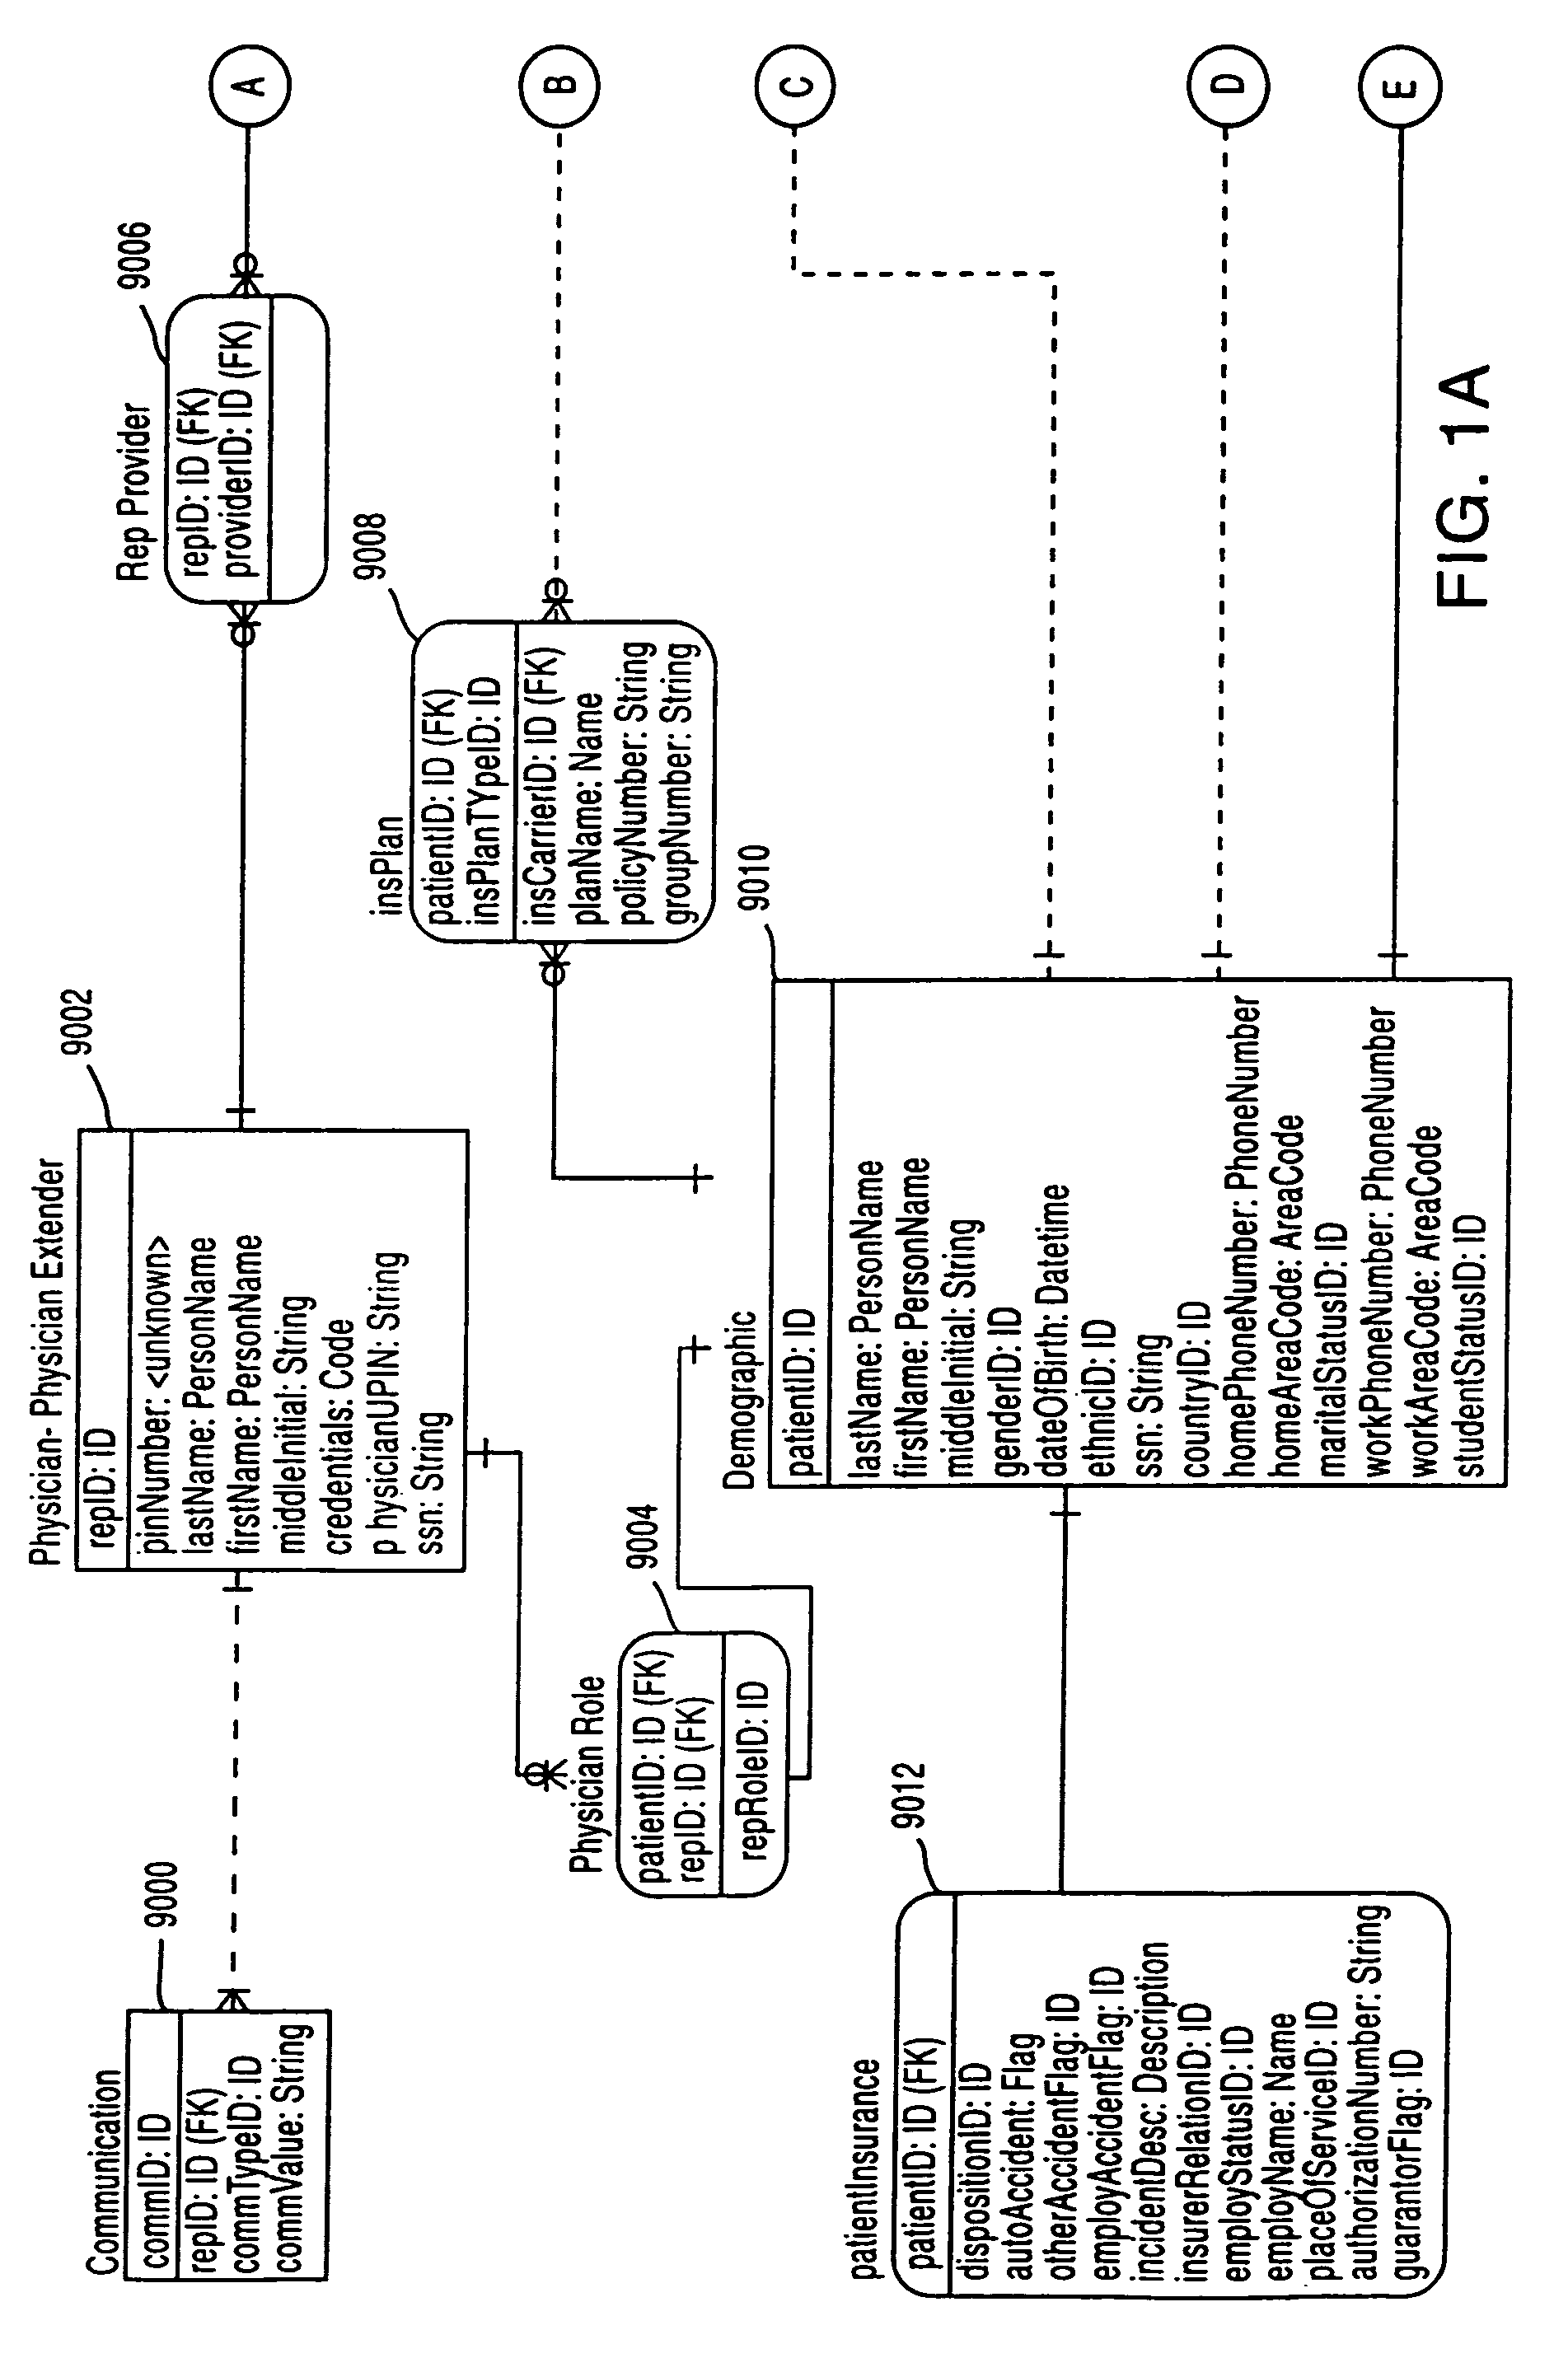 Video visitation system and method for a health care location